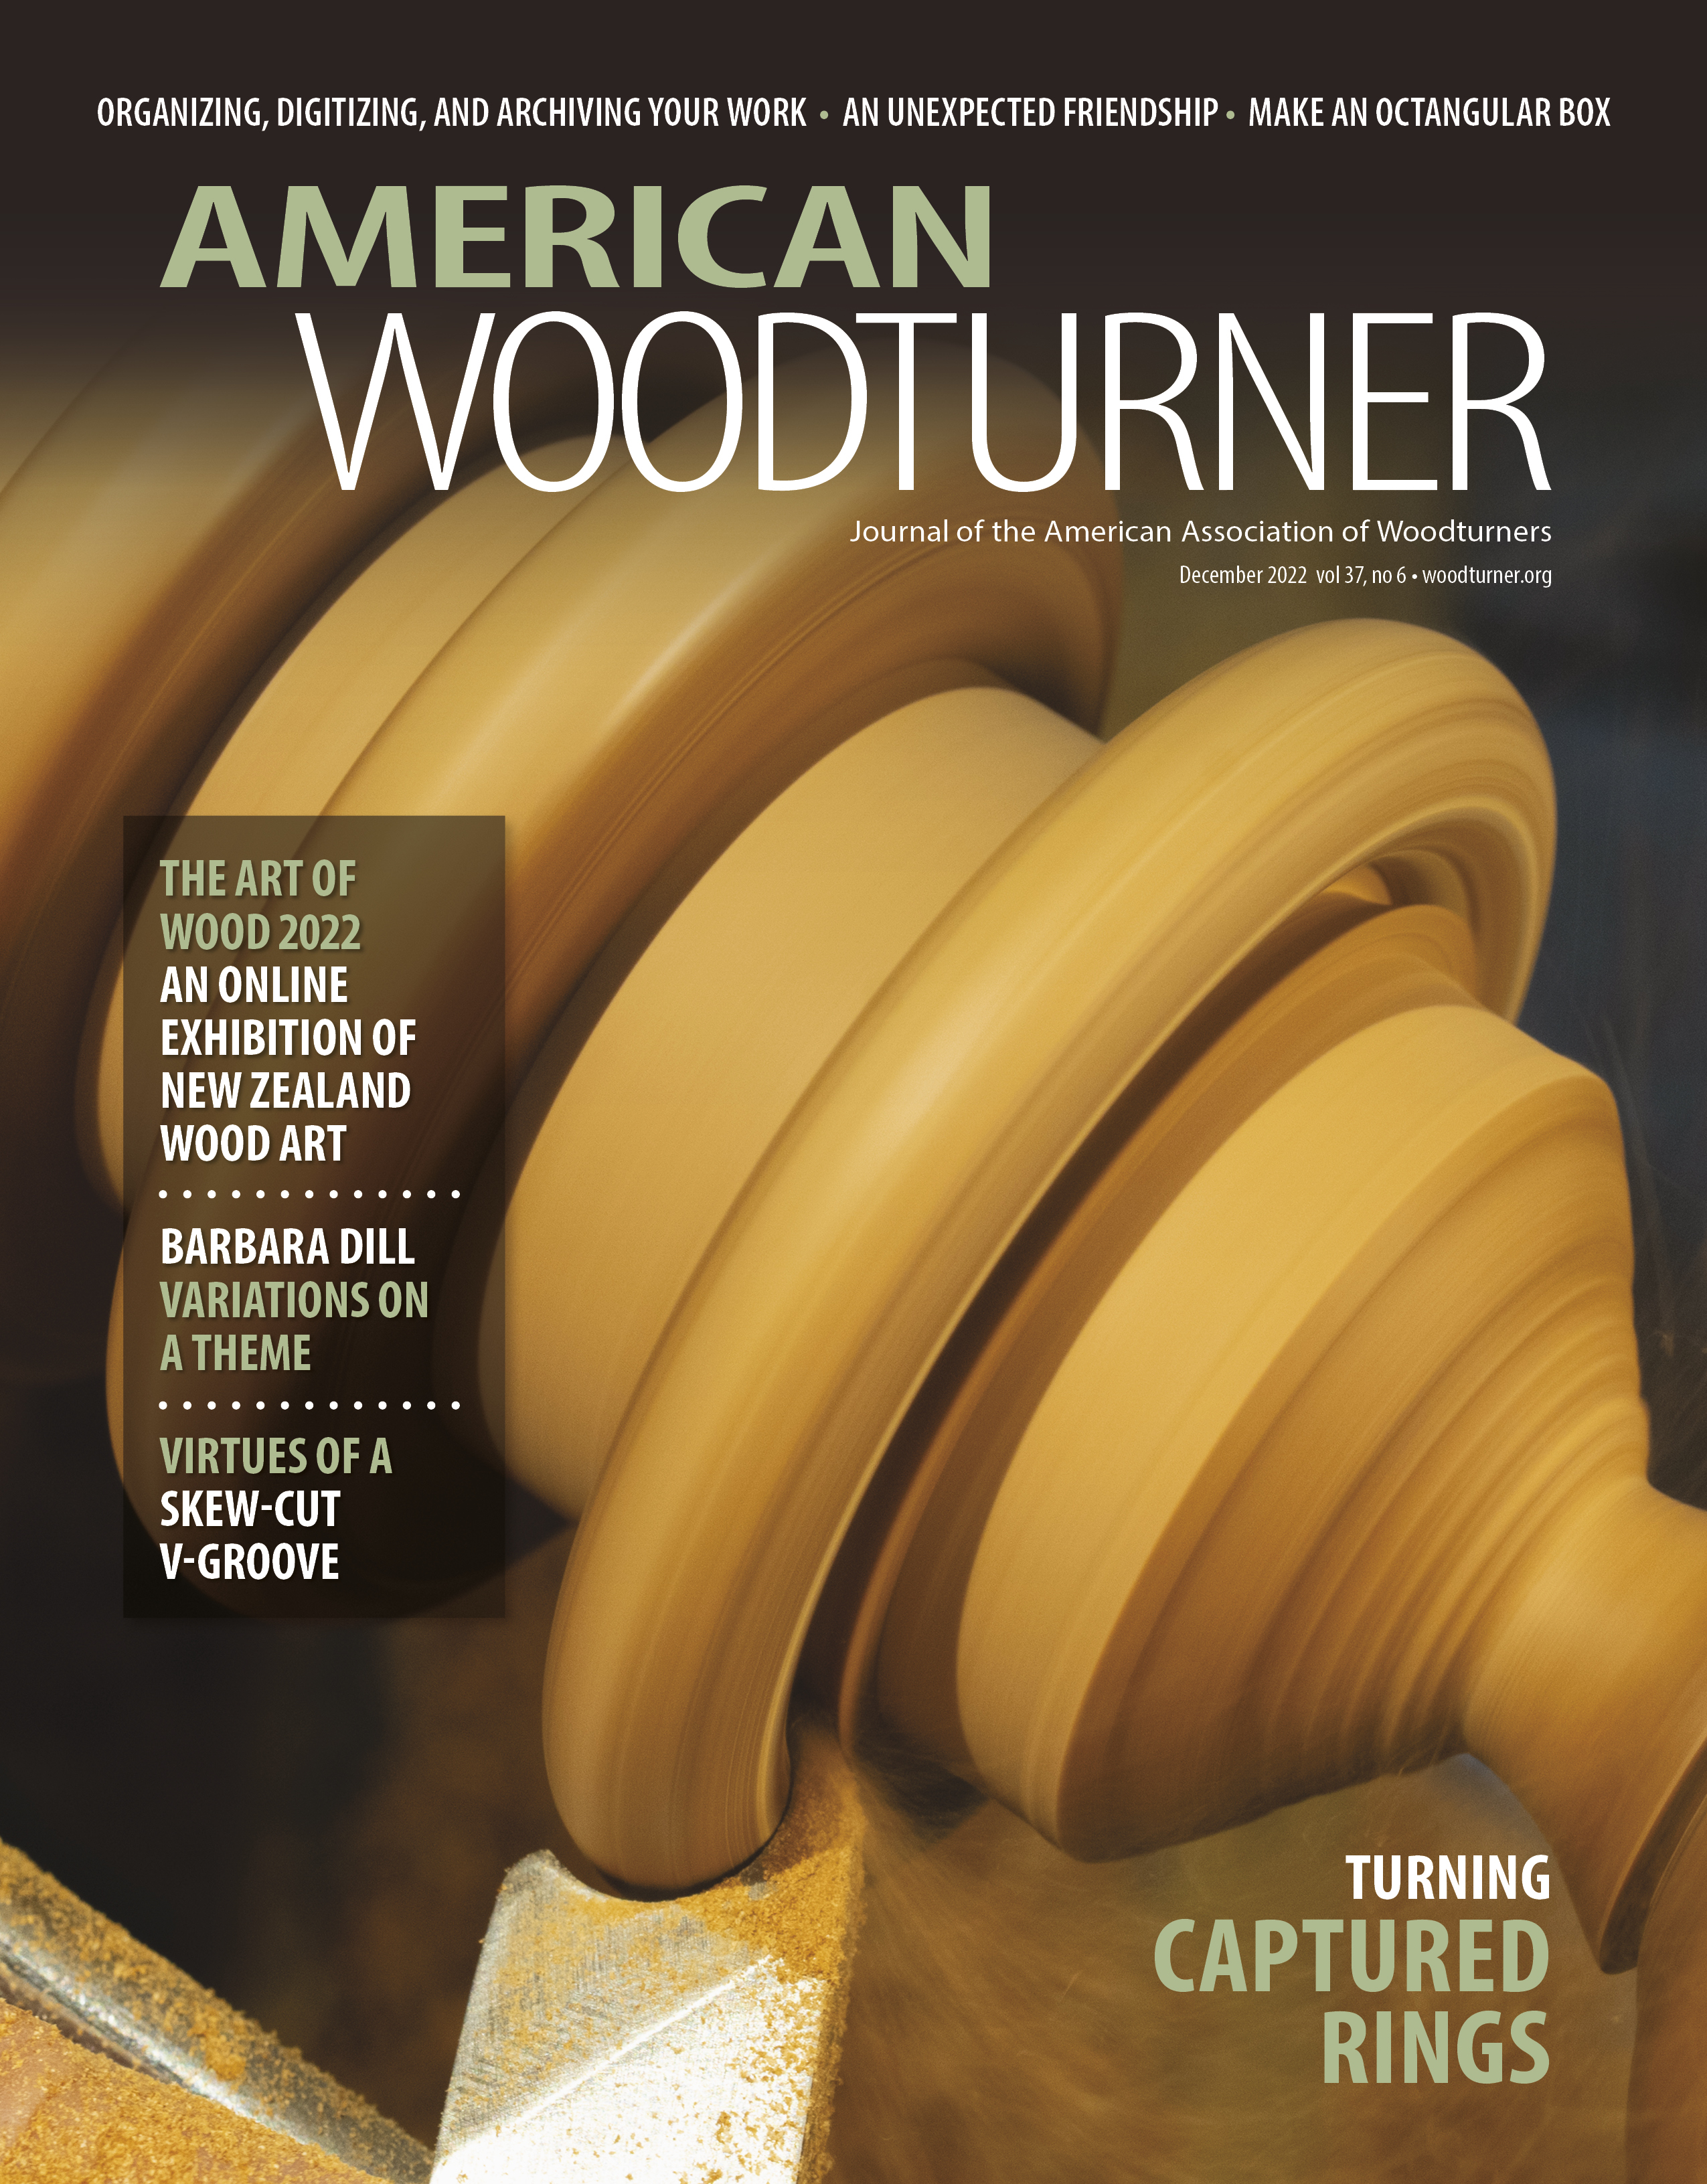 American Woodturner 37 issue 6 Replacement